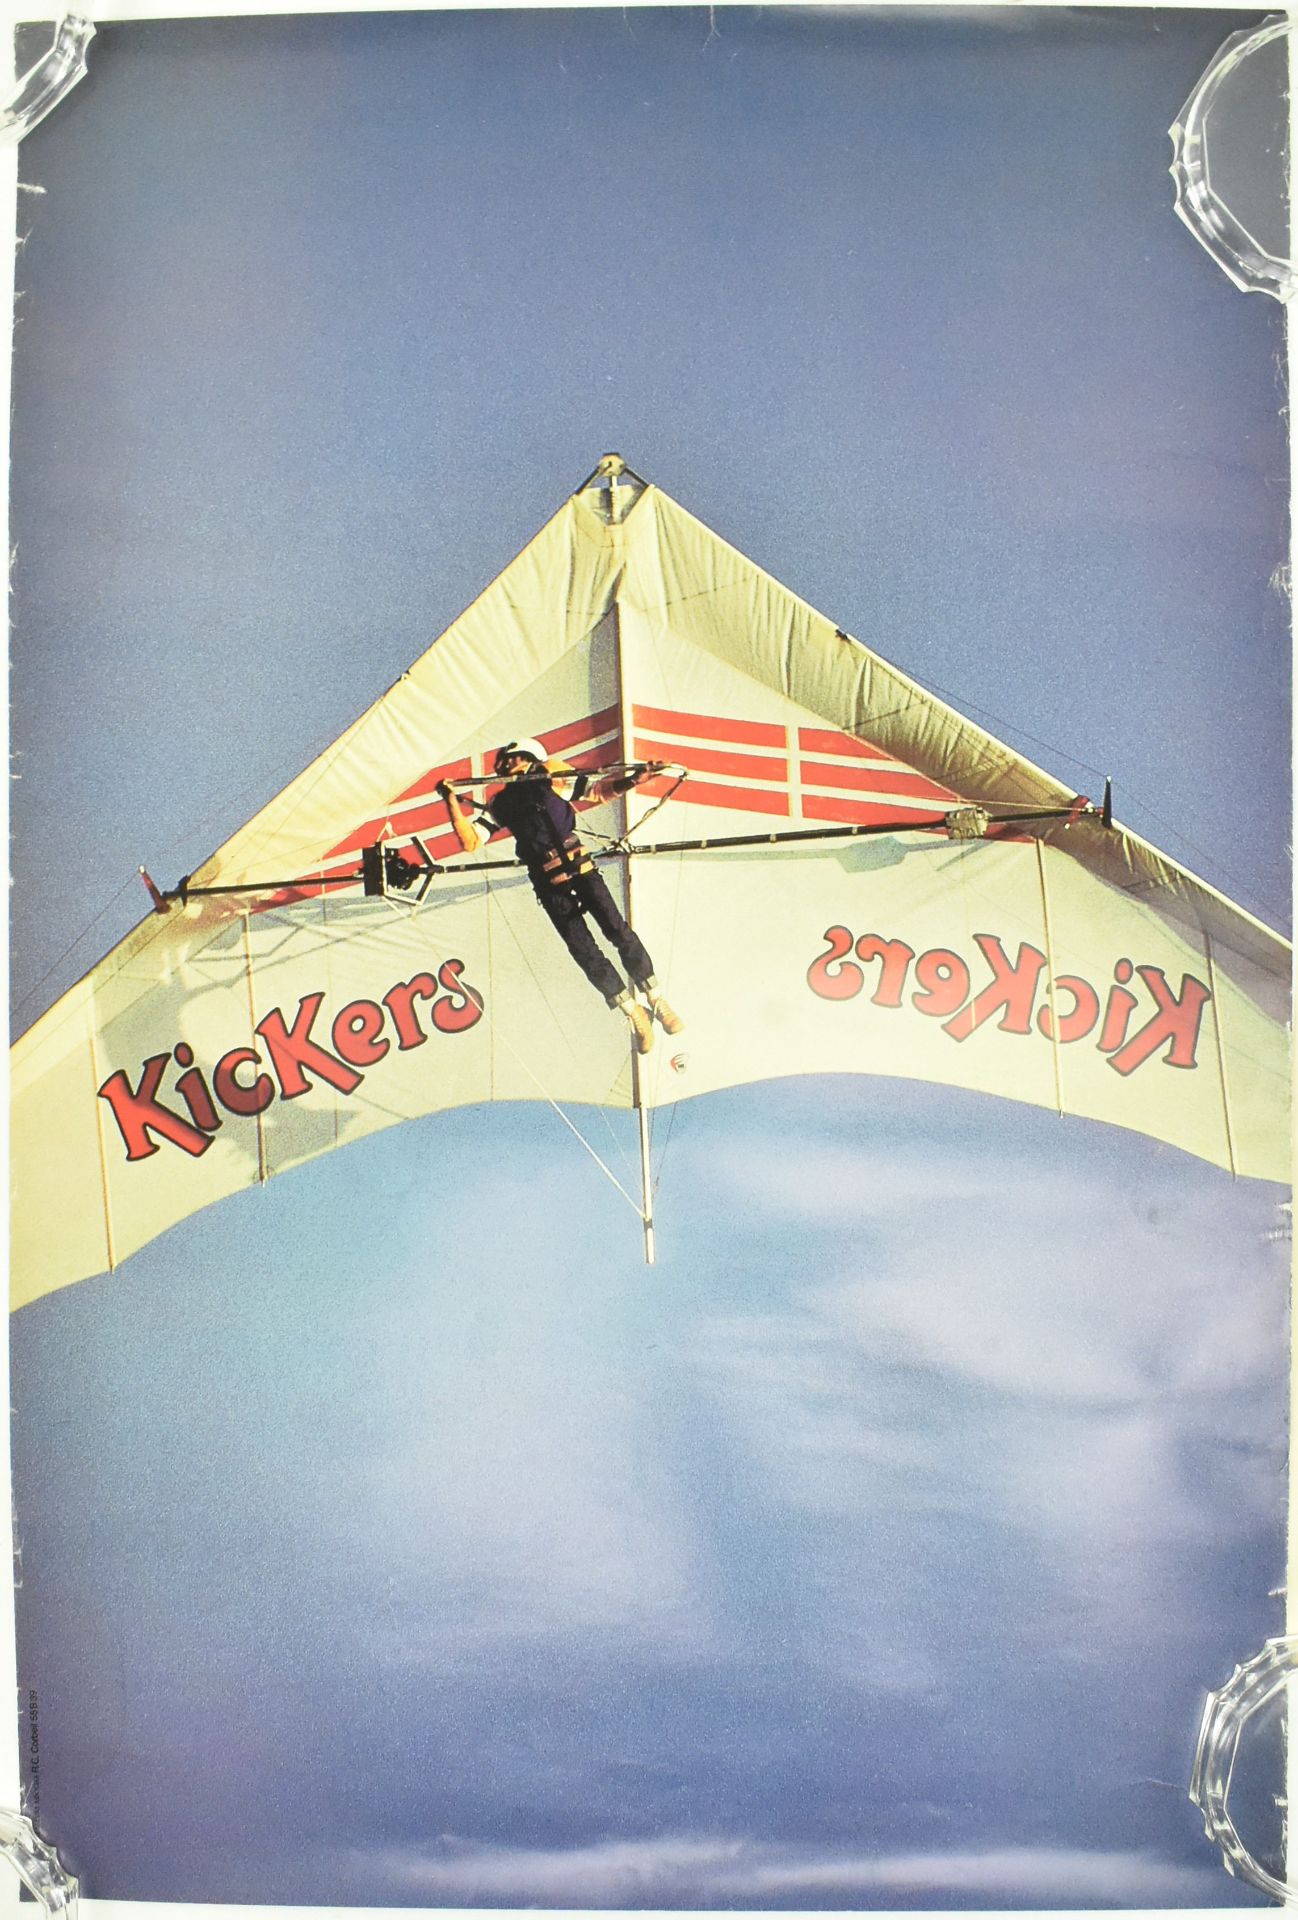 VINTAGE MID CENTURY KICKERS ADVERTISING POSTER T/W ANOTHER - Image 4 of 5